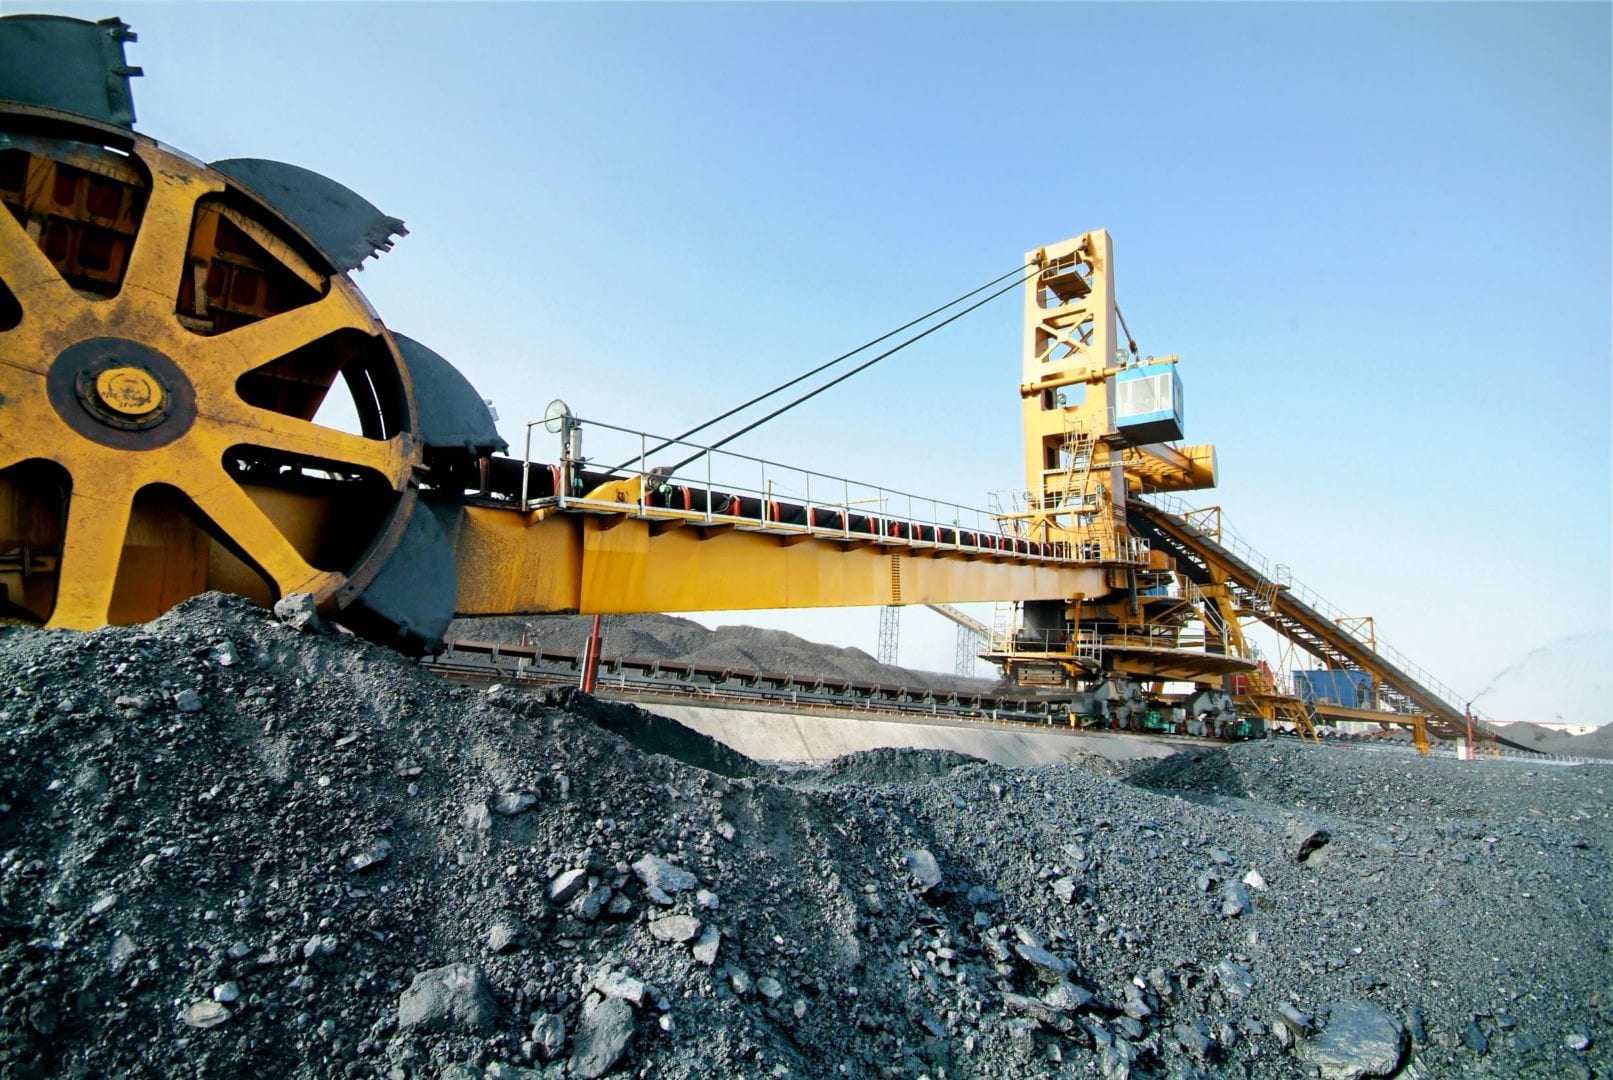 Mining automation market size will grow $3.31bn by 2023 | Mining News